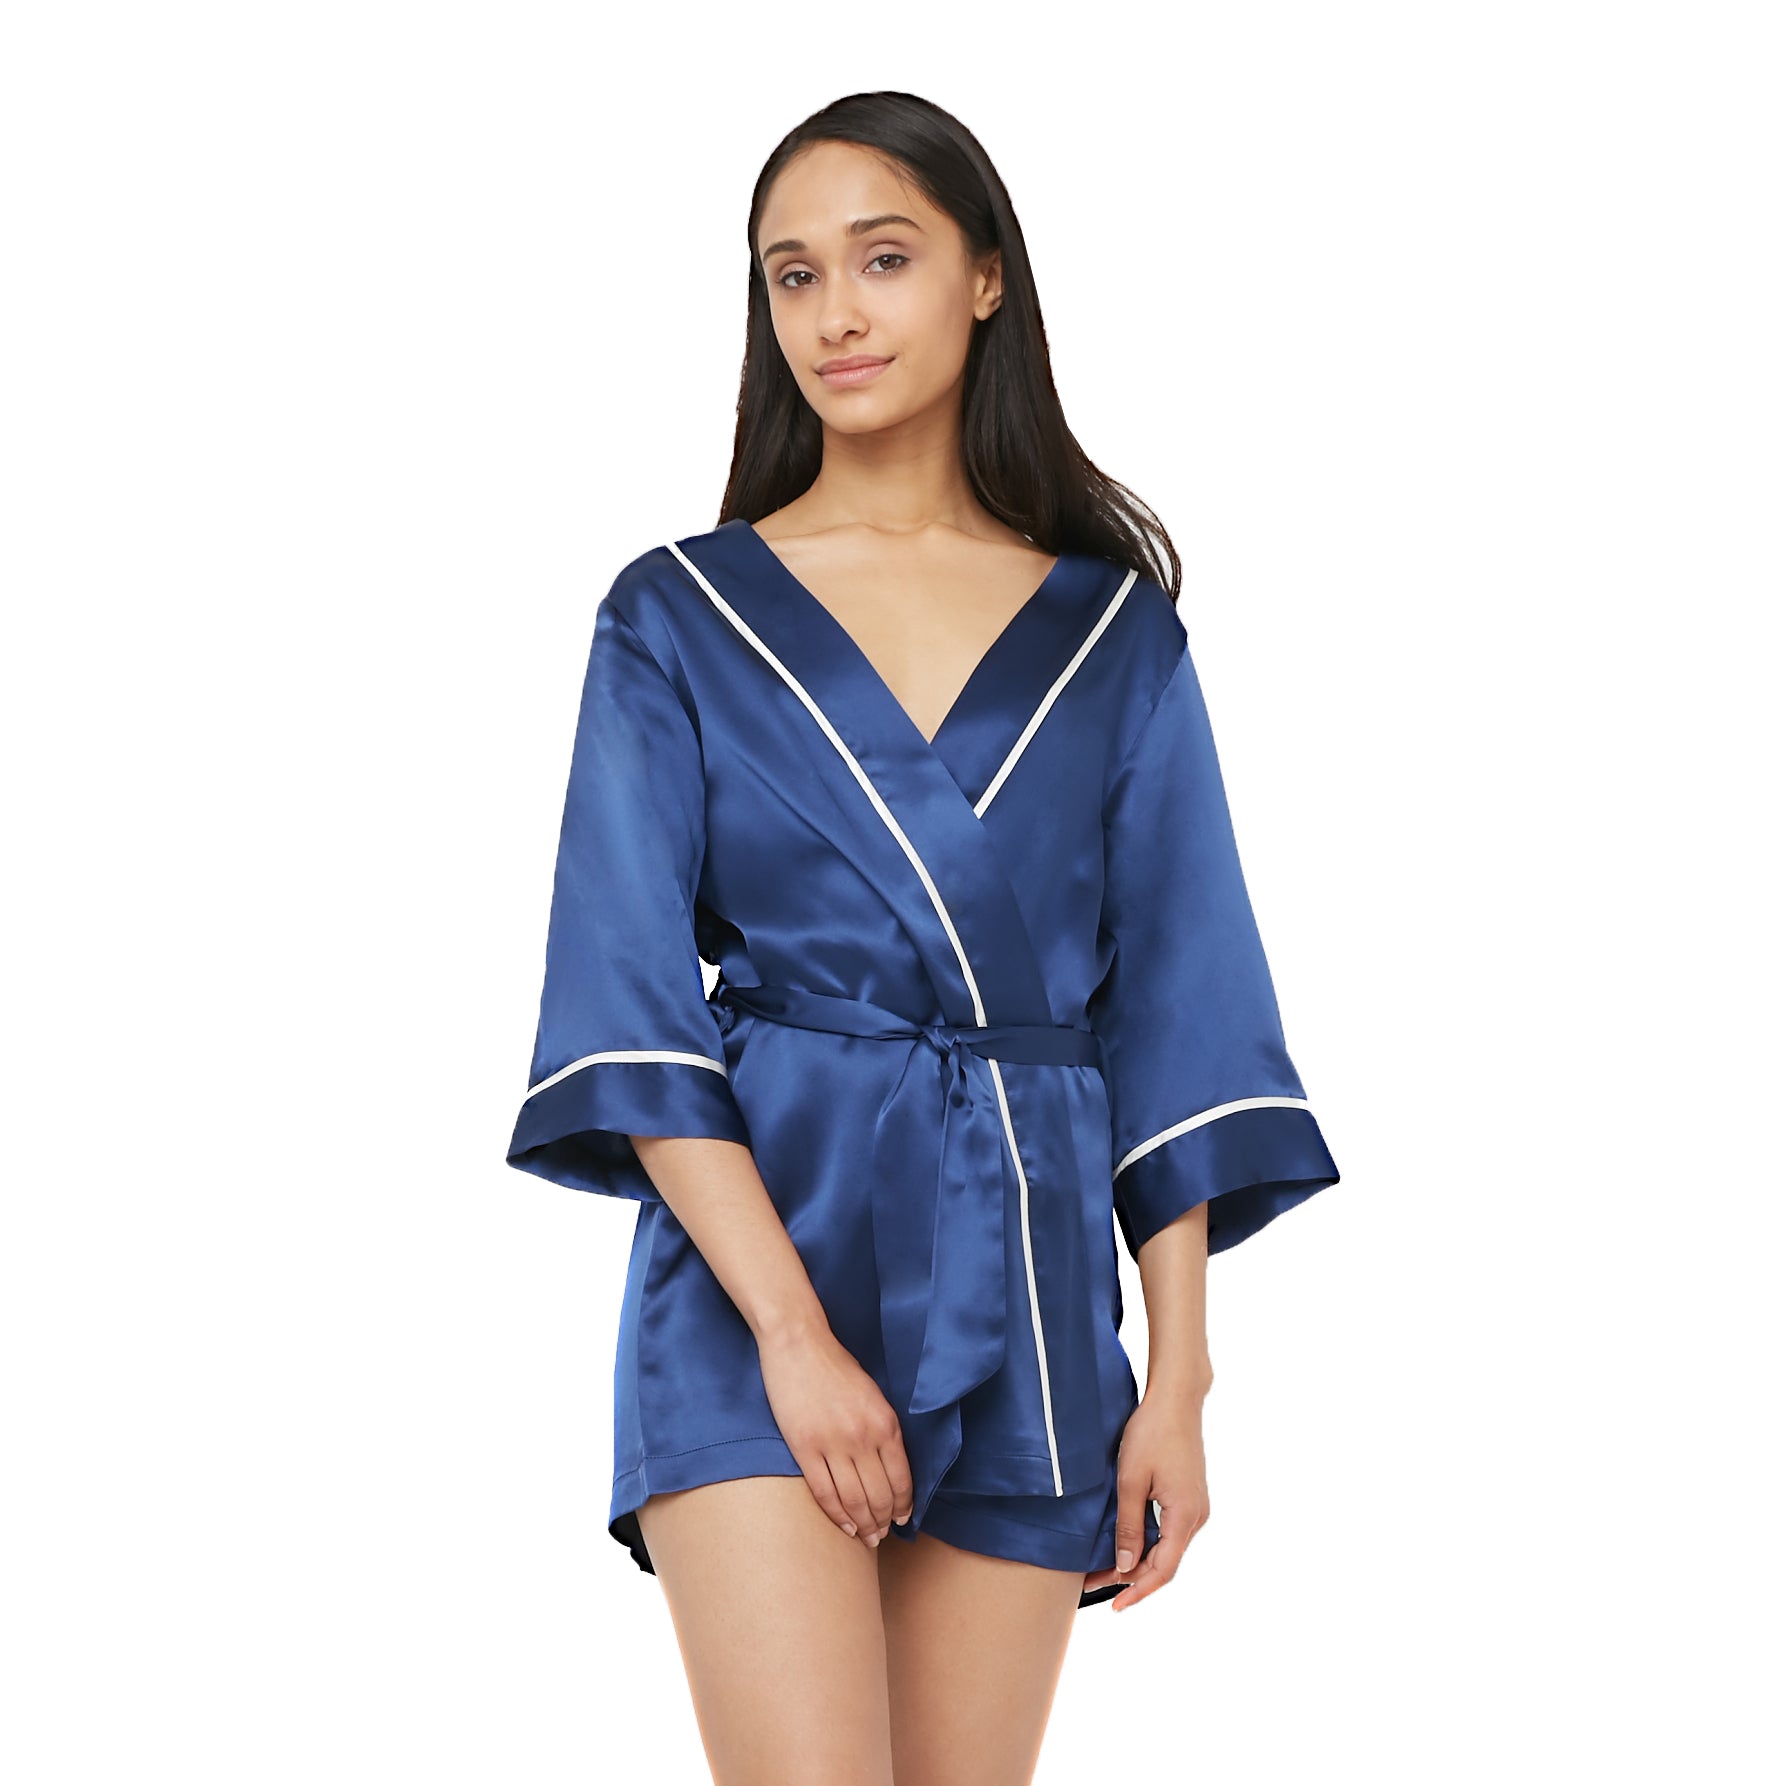 Classic Silk Robe with Contrast Piping - MYK Silk #style_kimono style #color_navy blue